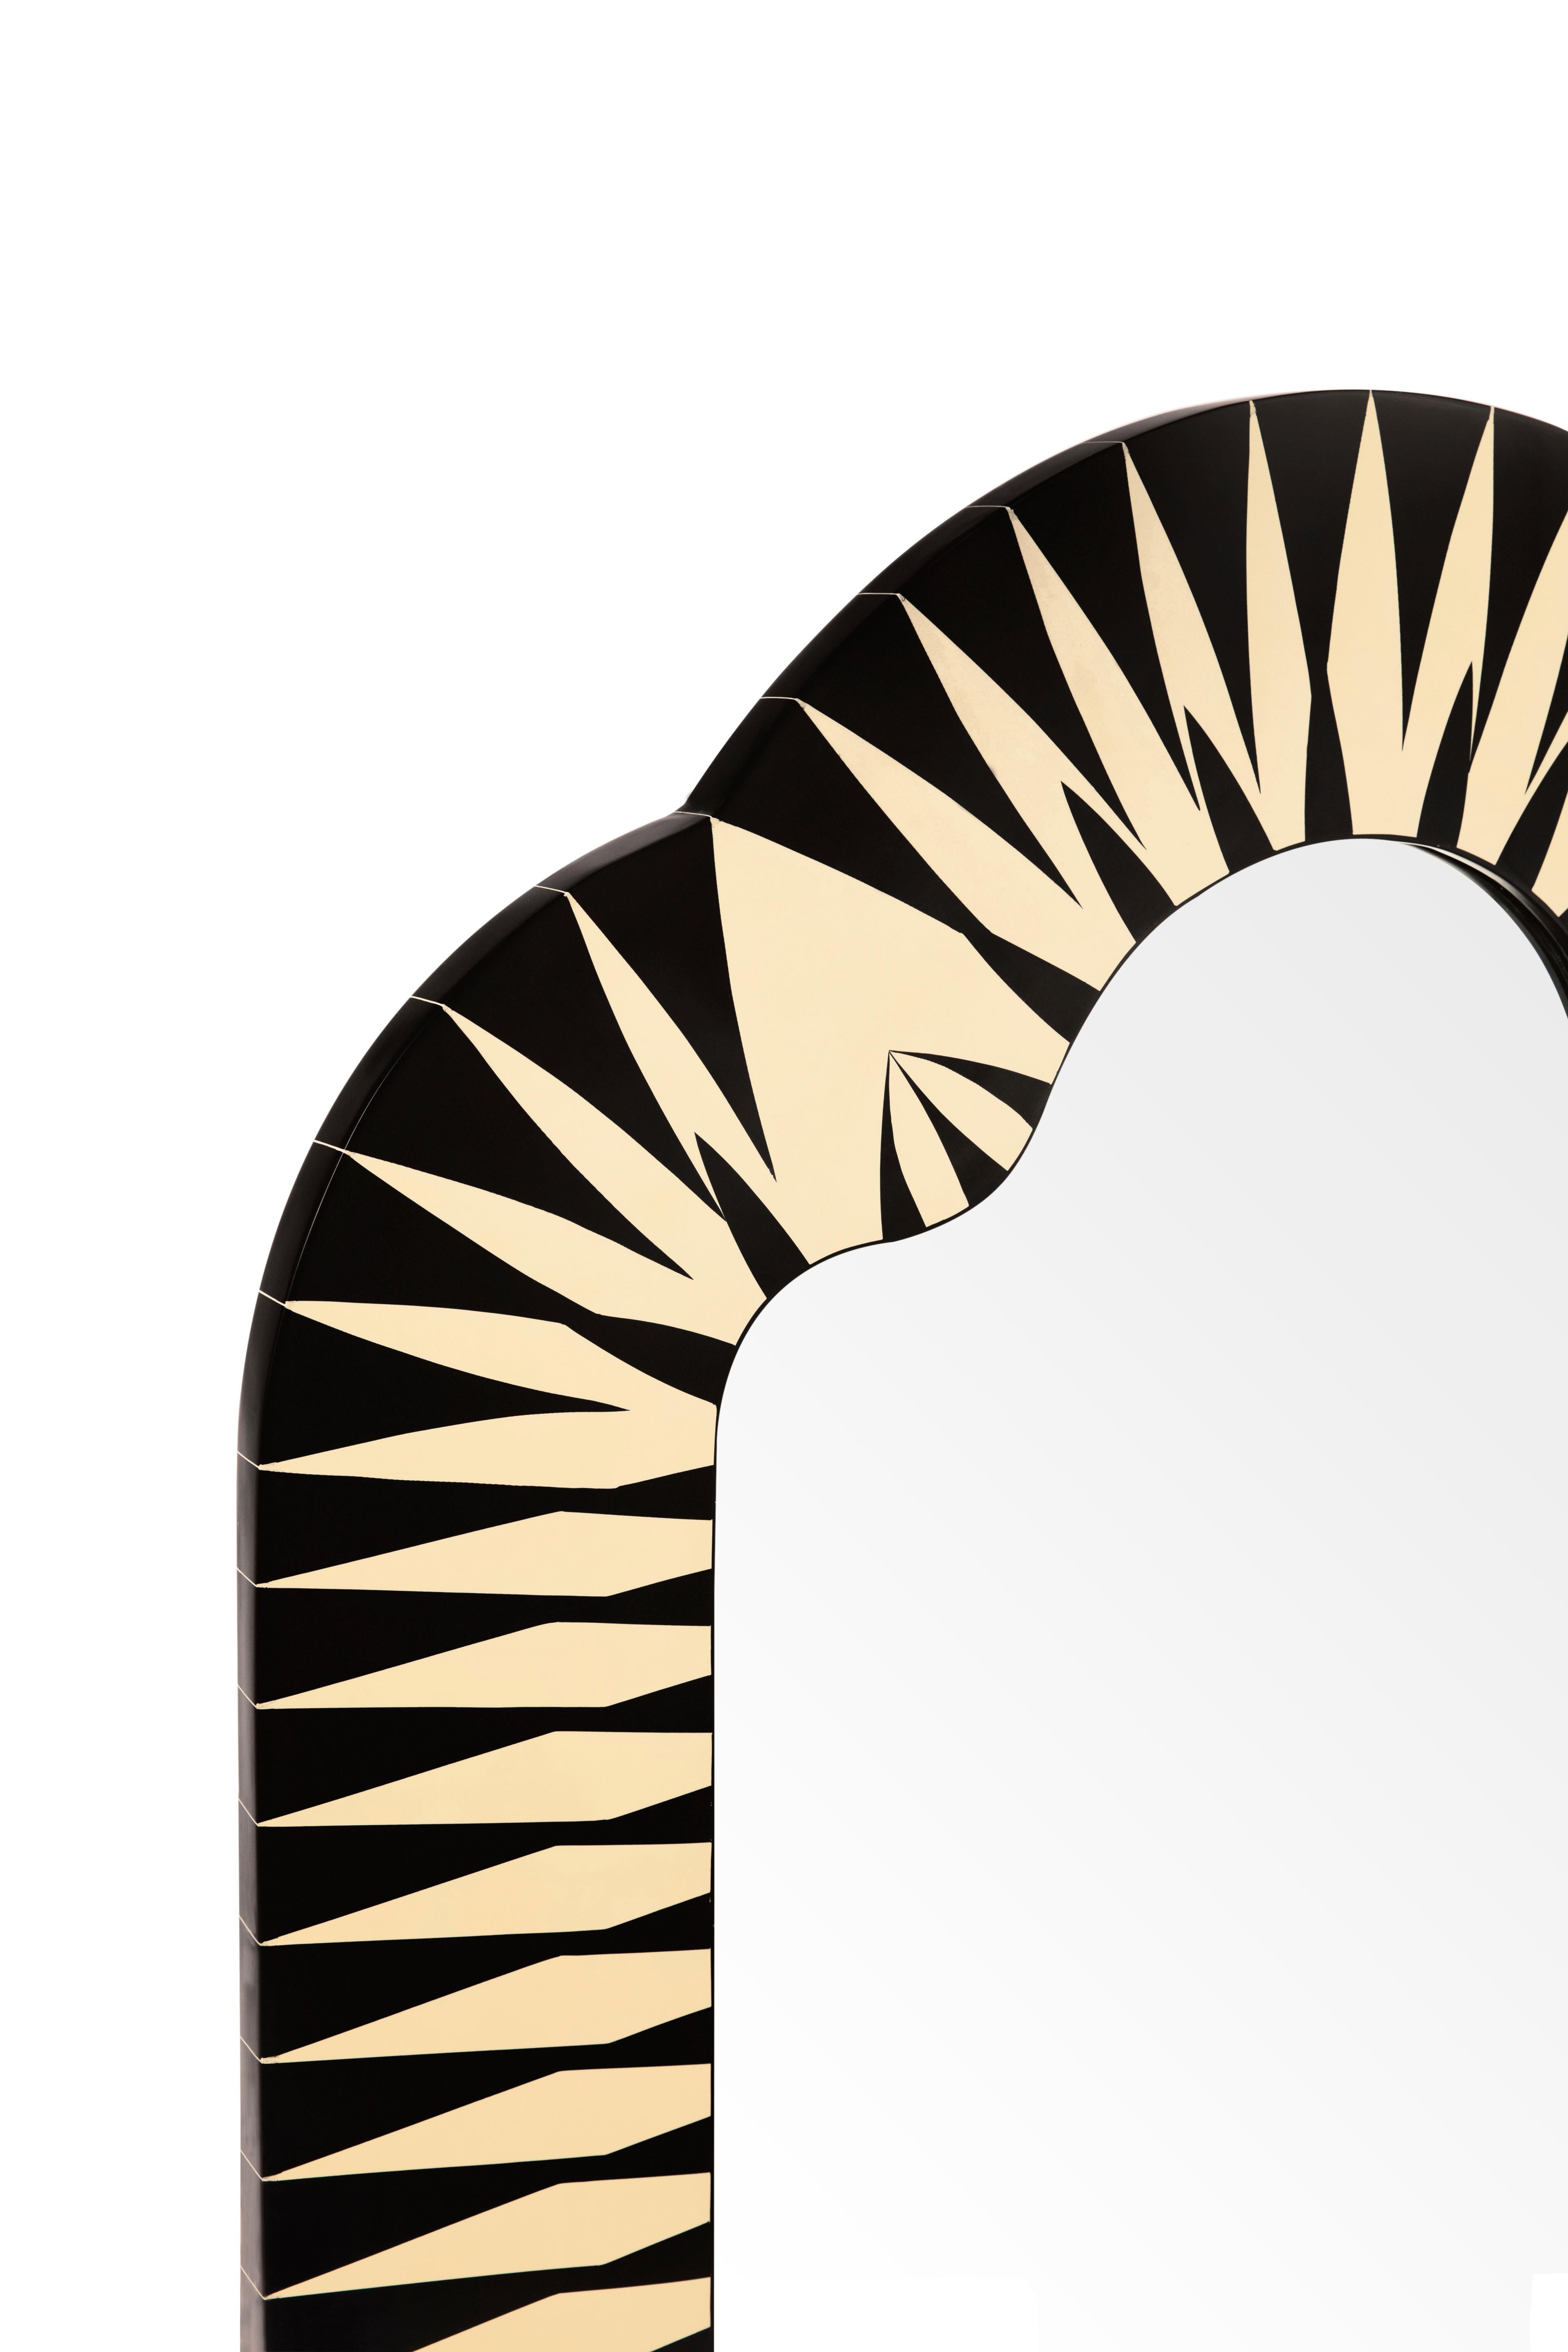 The Big Parade Console Wall Mirror by Matteo Cibic is a large fun shaped mirror.

India's handicrafts are as multifarious as its cultures, and as rich as its history. The art of bone and horn inlay is omnipresent here. Artisans from the Northern